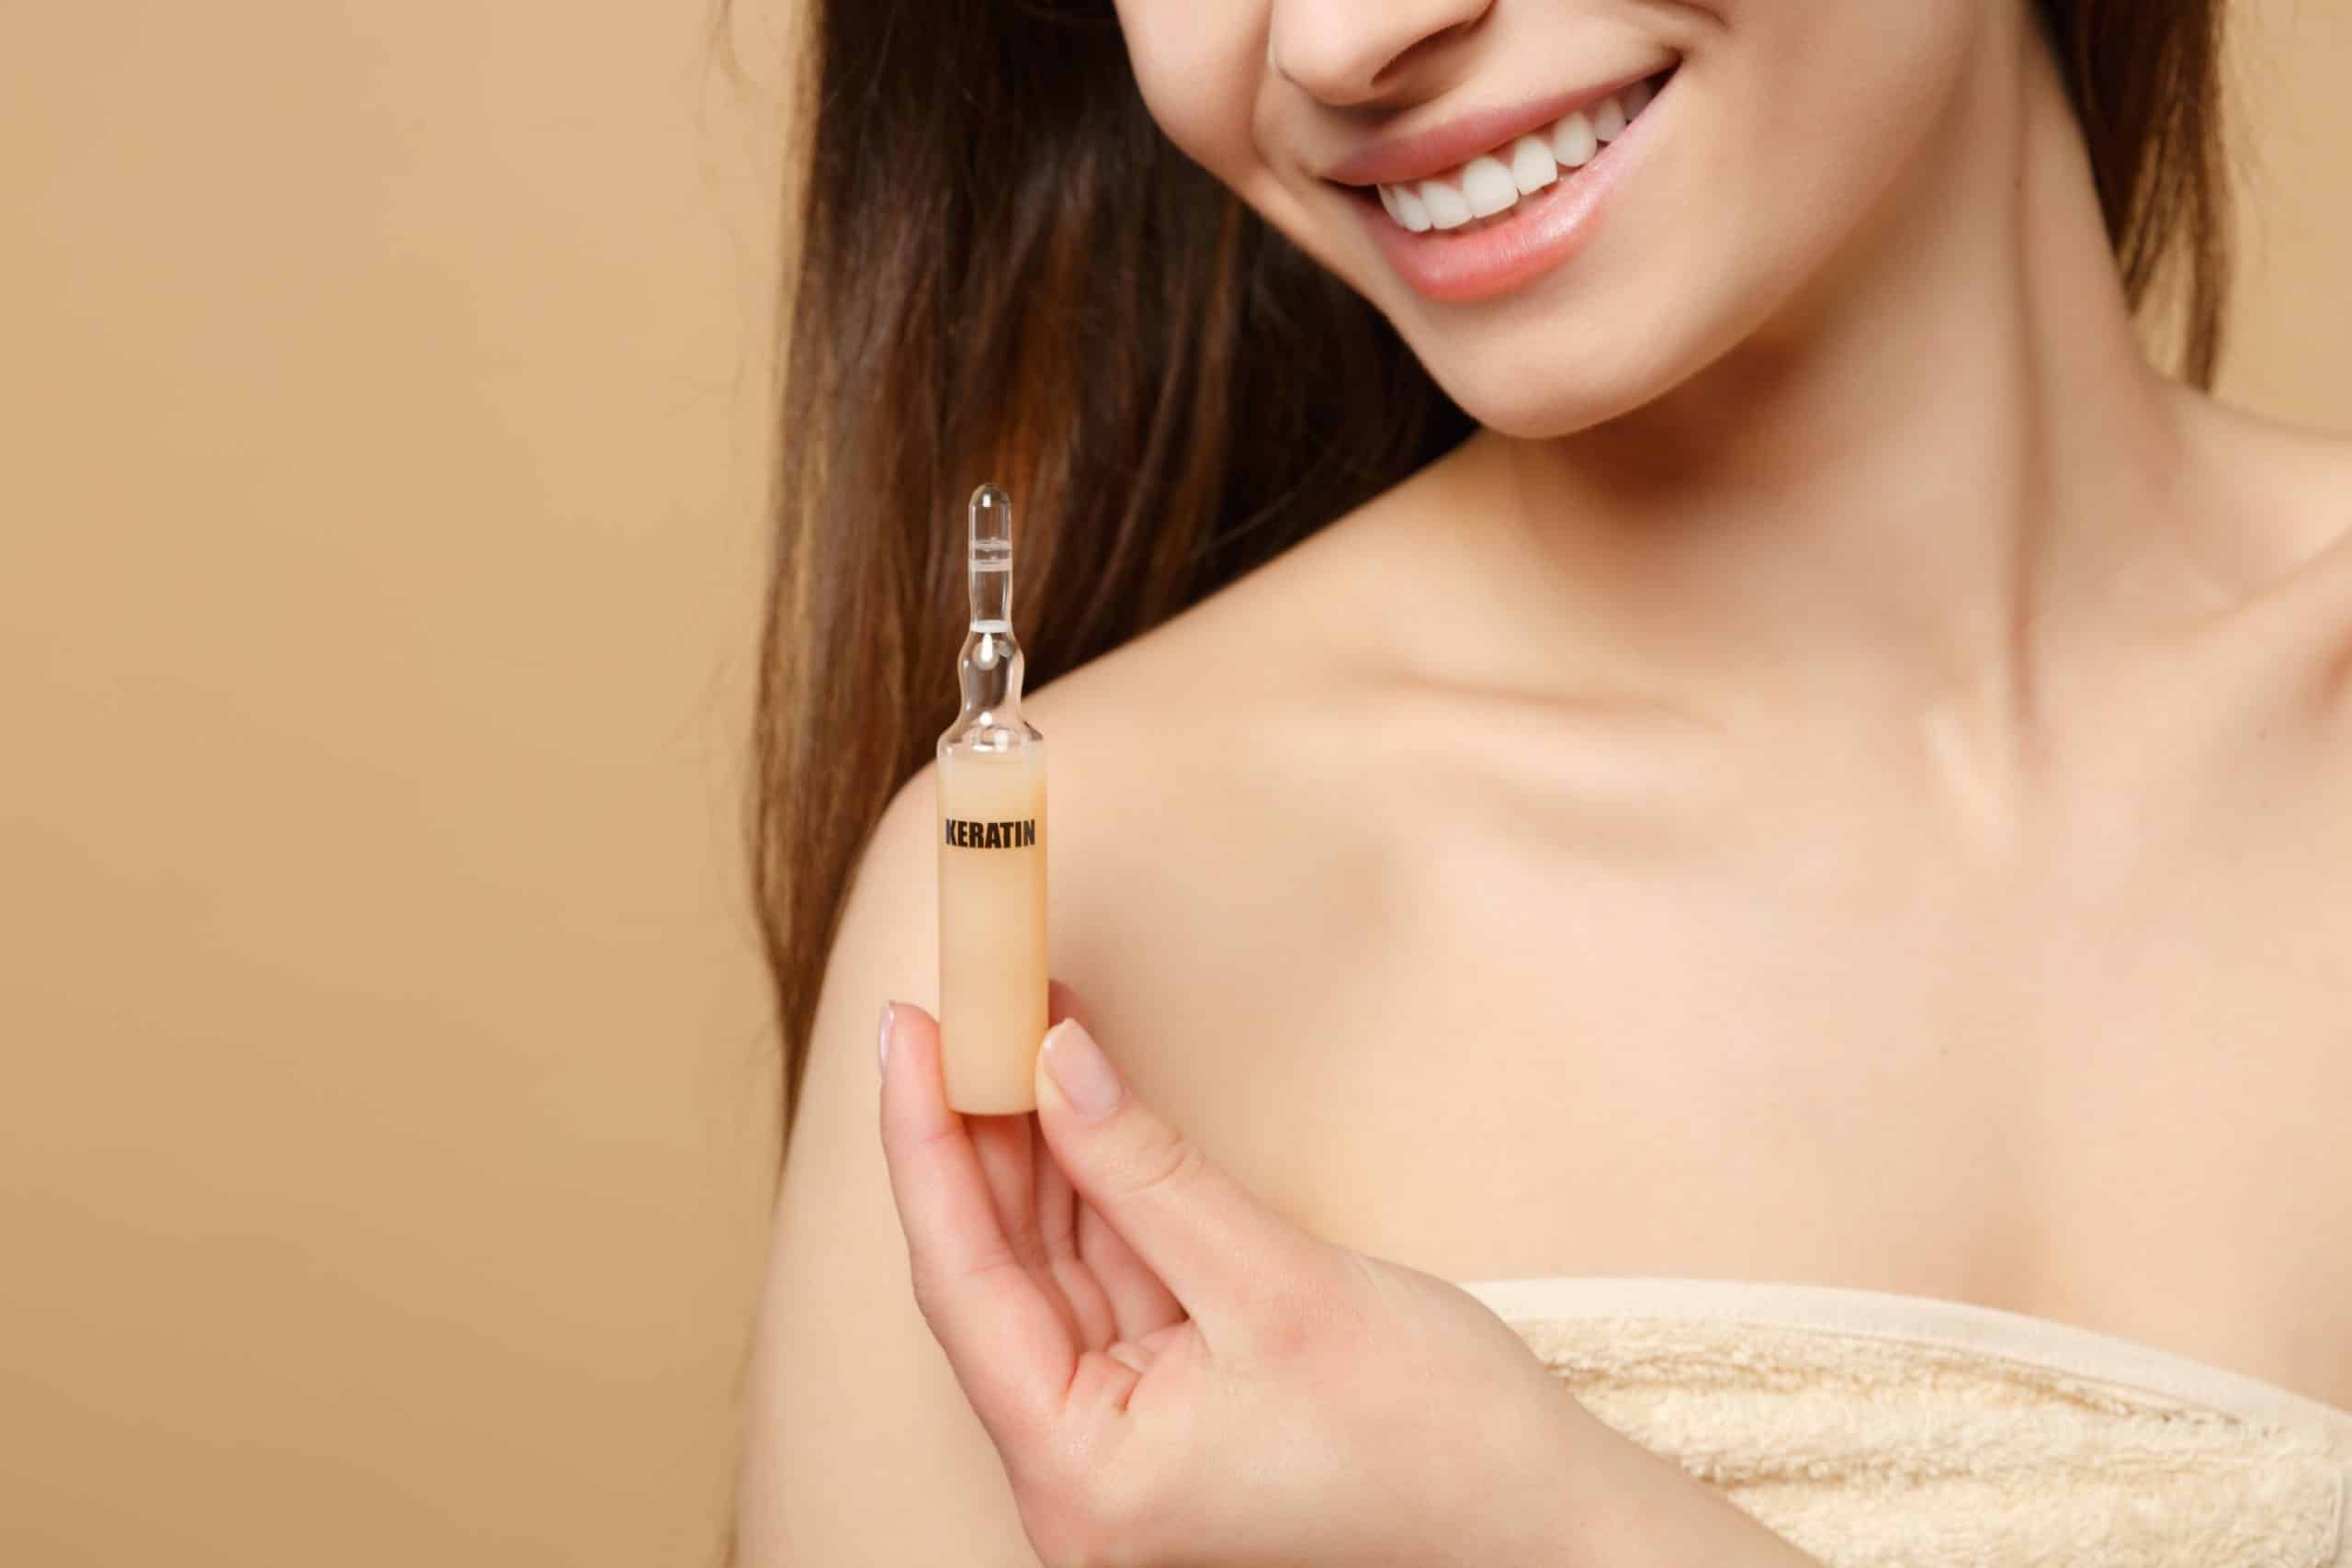 Hair ampoules – are they worth using?